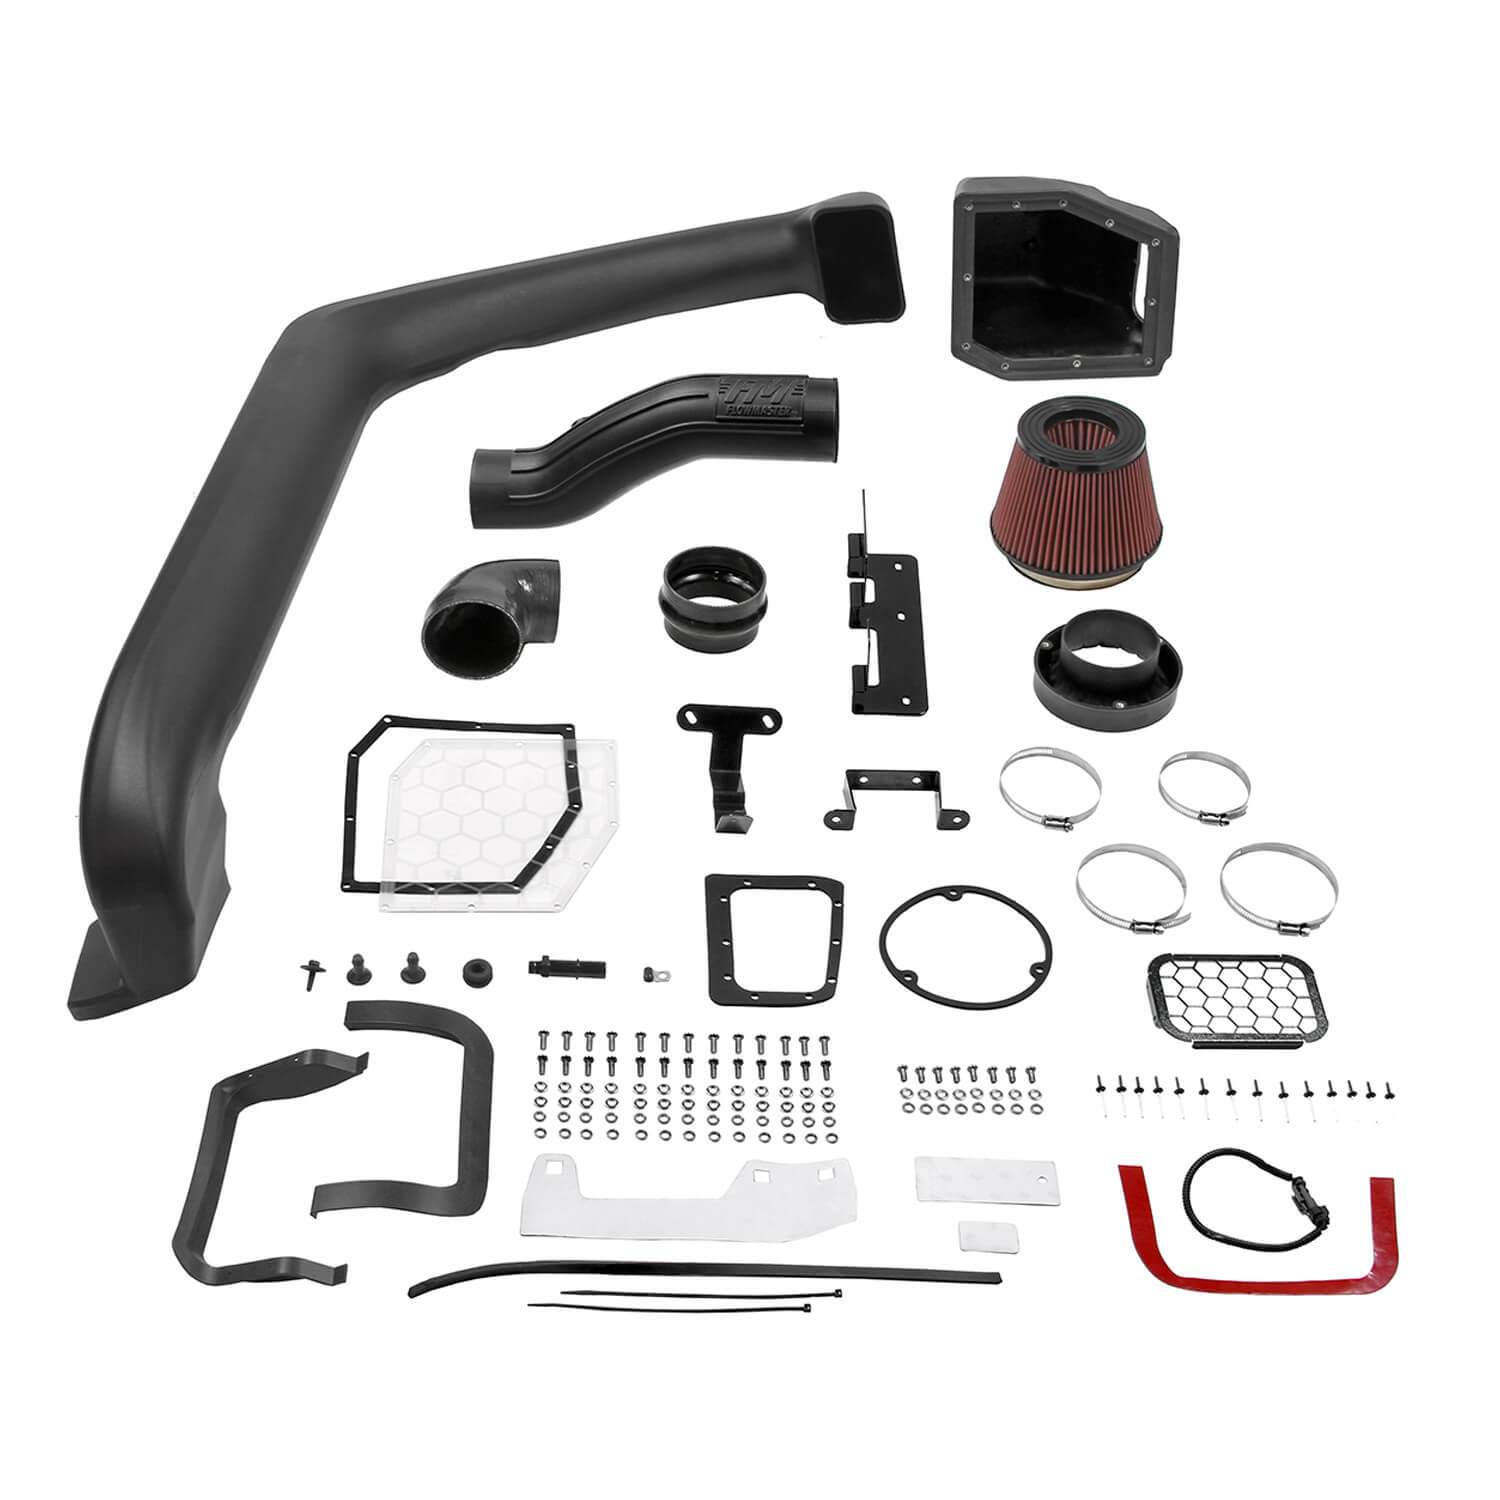 '18-20 Jeep JL 3.6L Delta Force Performance Air Intake Performance Flowmaster parts